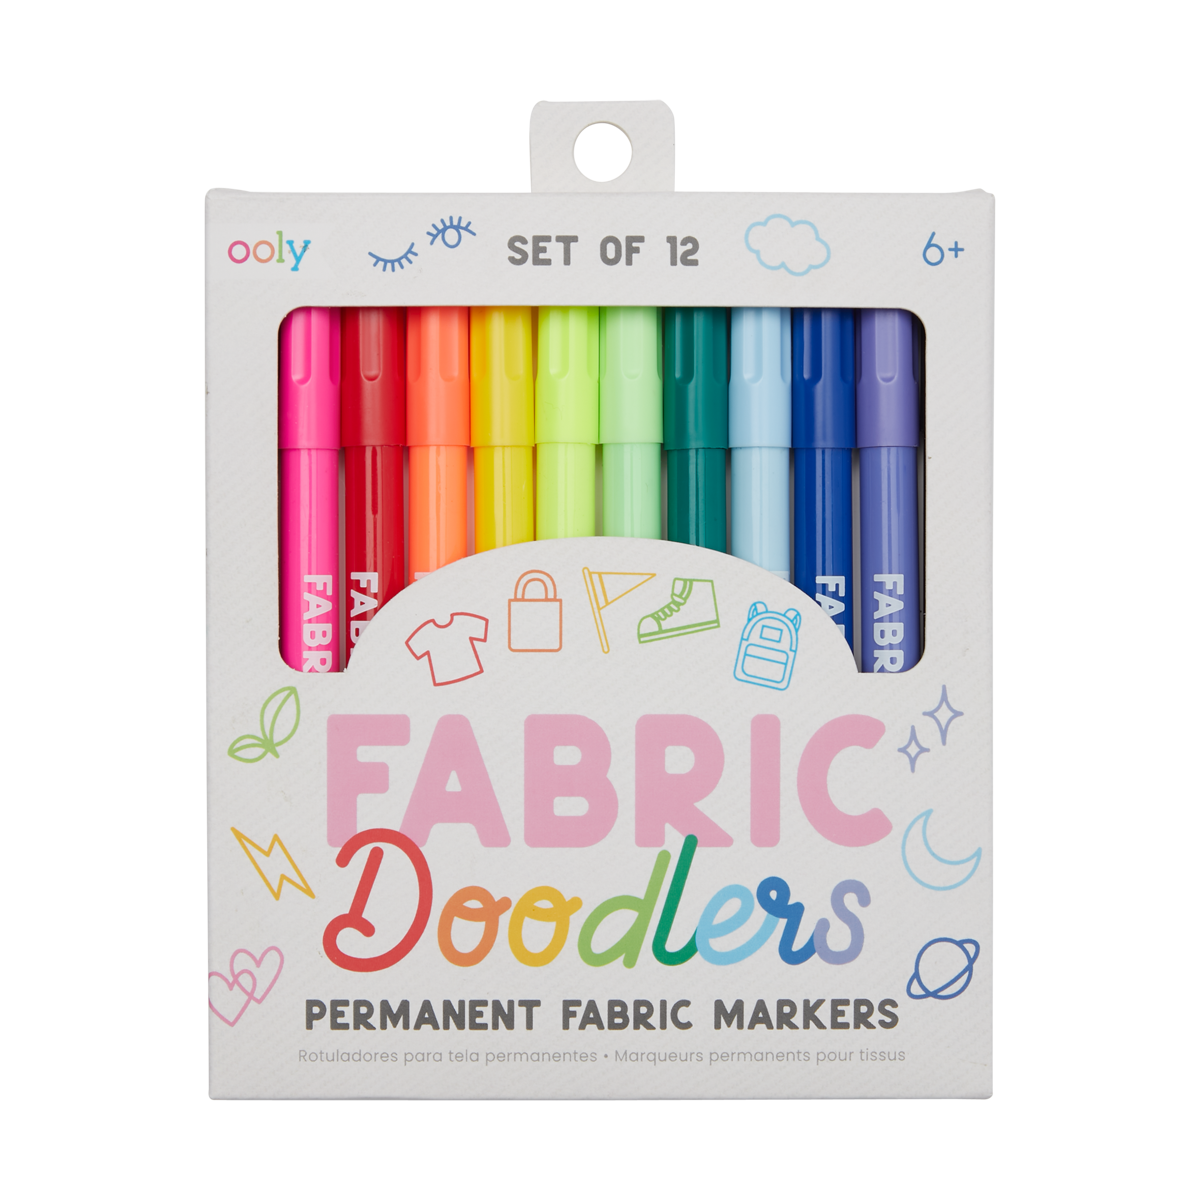 Fabric Markers Textile Clothes T-Shirt Colour Draw Art Craft Pens Pack of 4